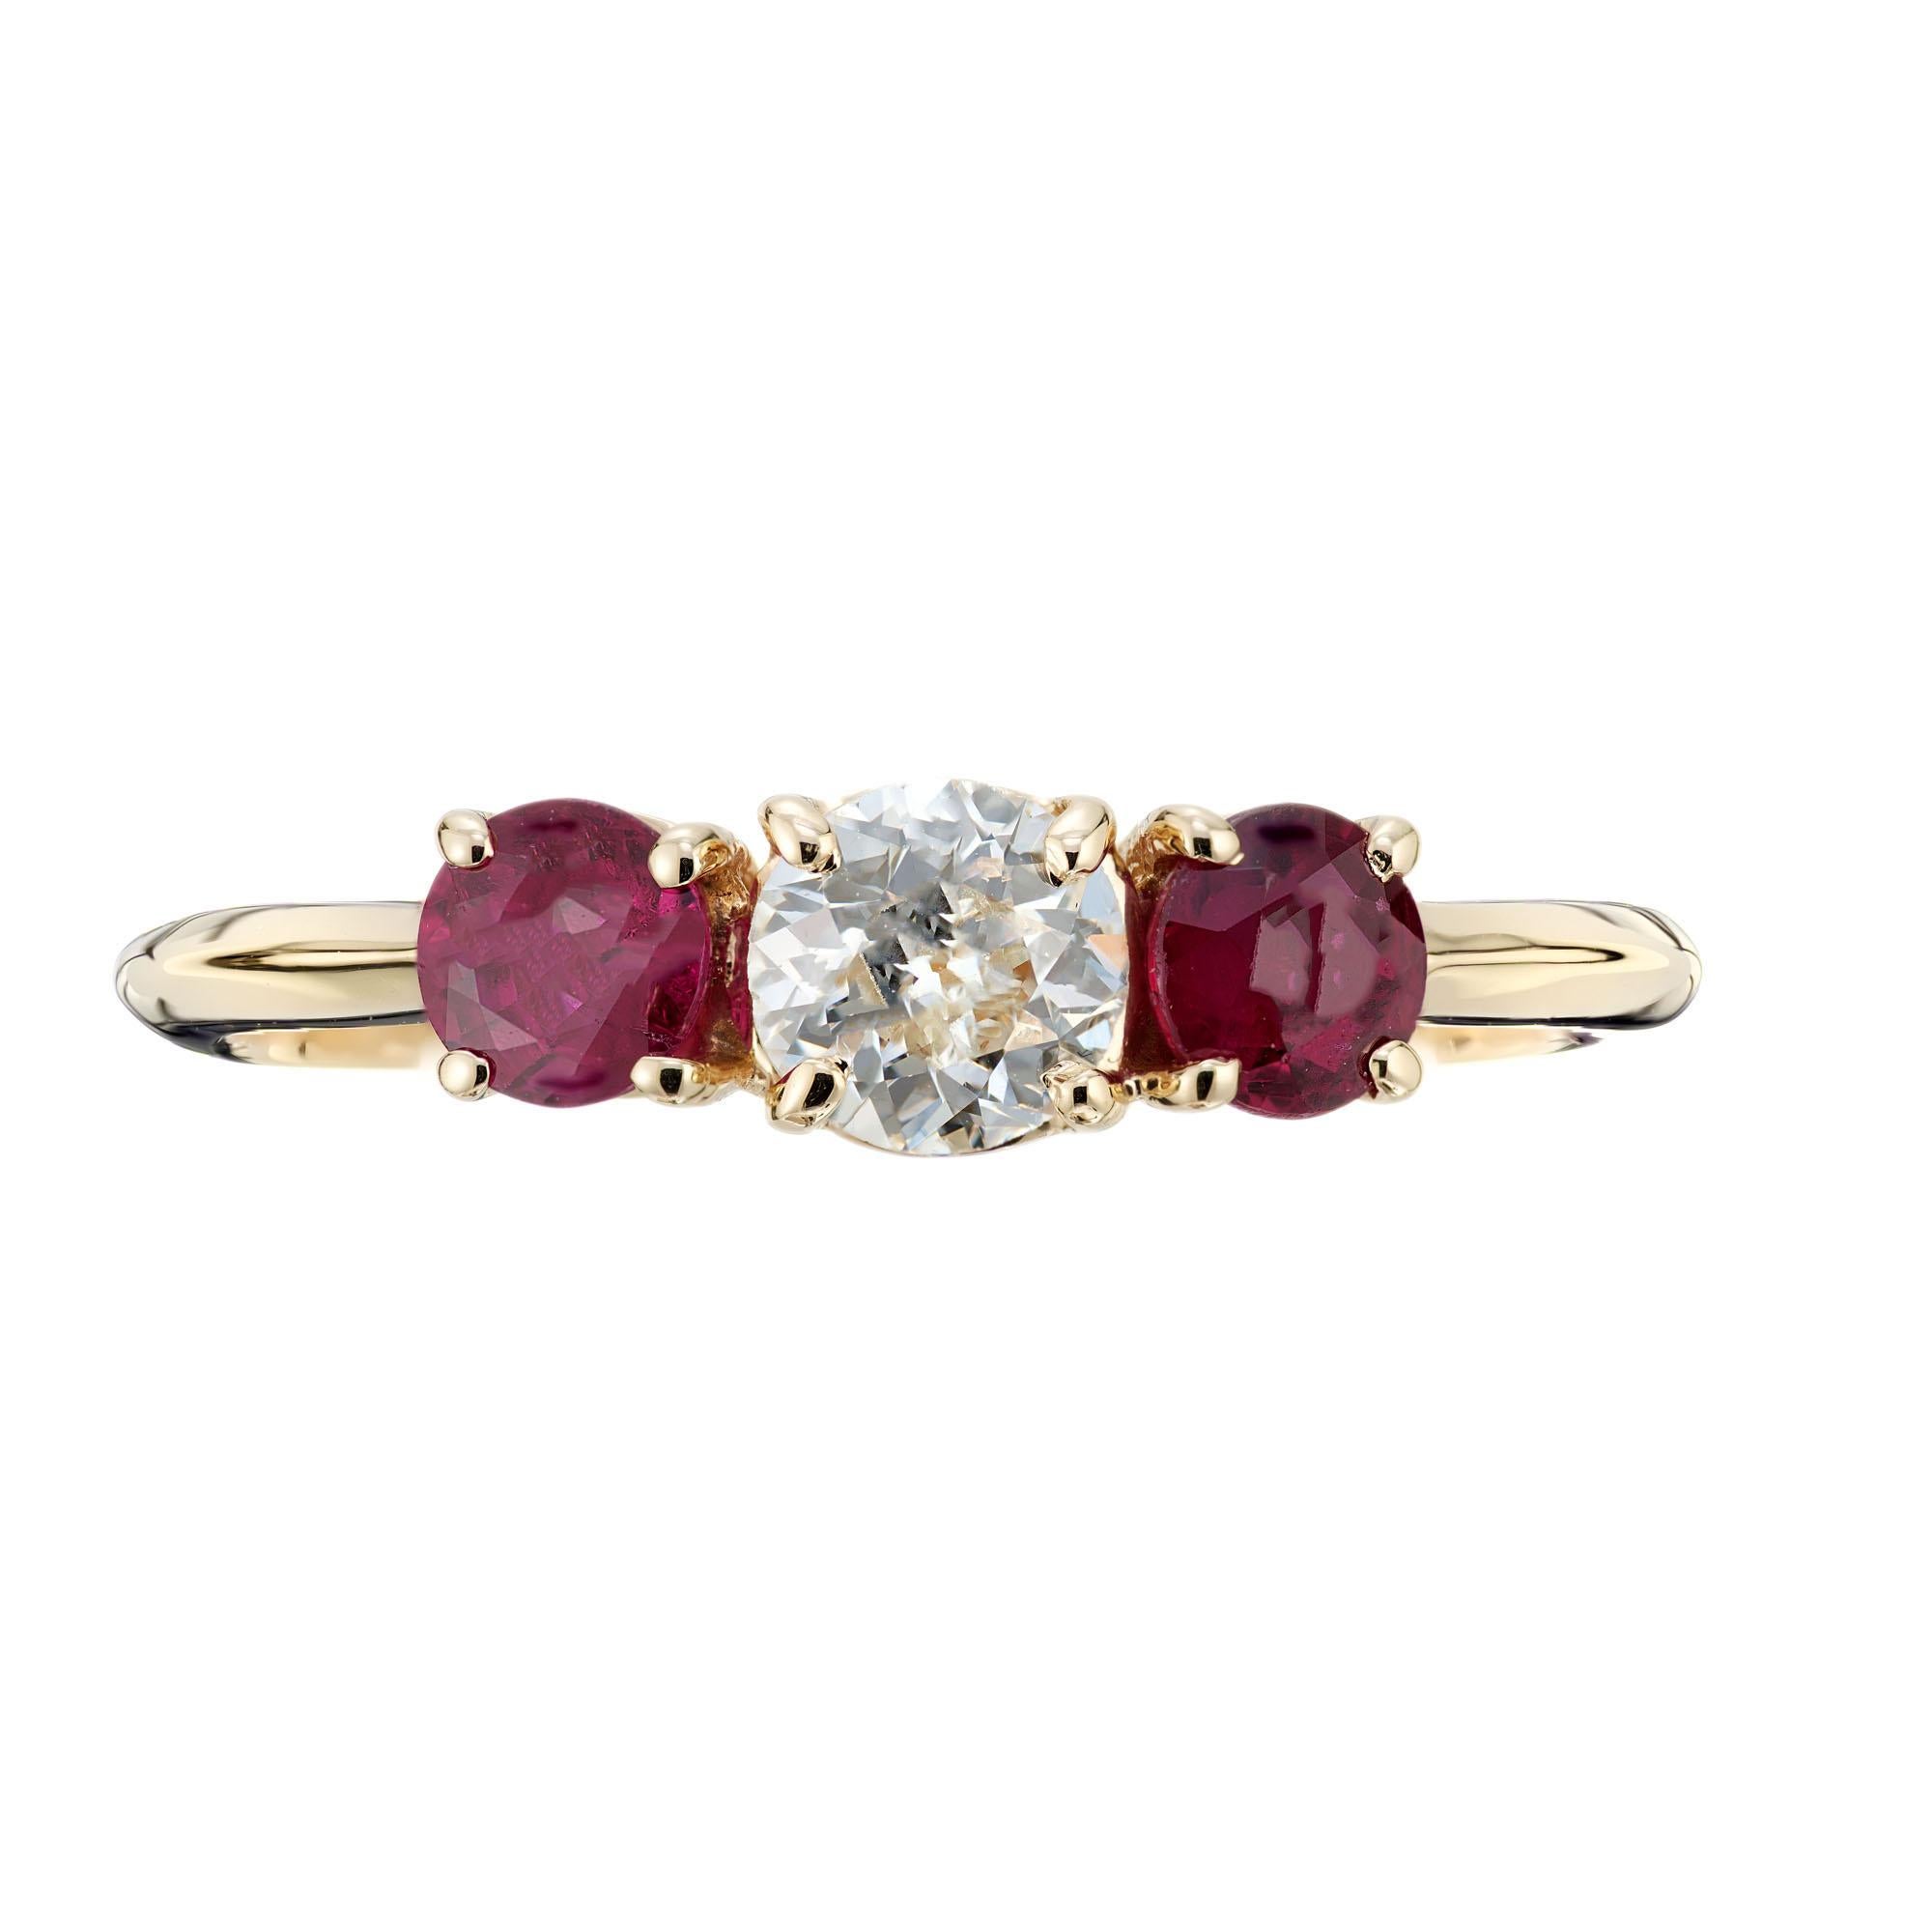 Diamond and ruby engagement ring. Old European cut center diamond set with two red natural rubies in a classic 18k yellow gold three-stone setting. Created in the Peter Suchy Jewelers Workshop. 

1 old European cut diamond, G VS approx. .42cts
2